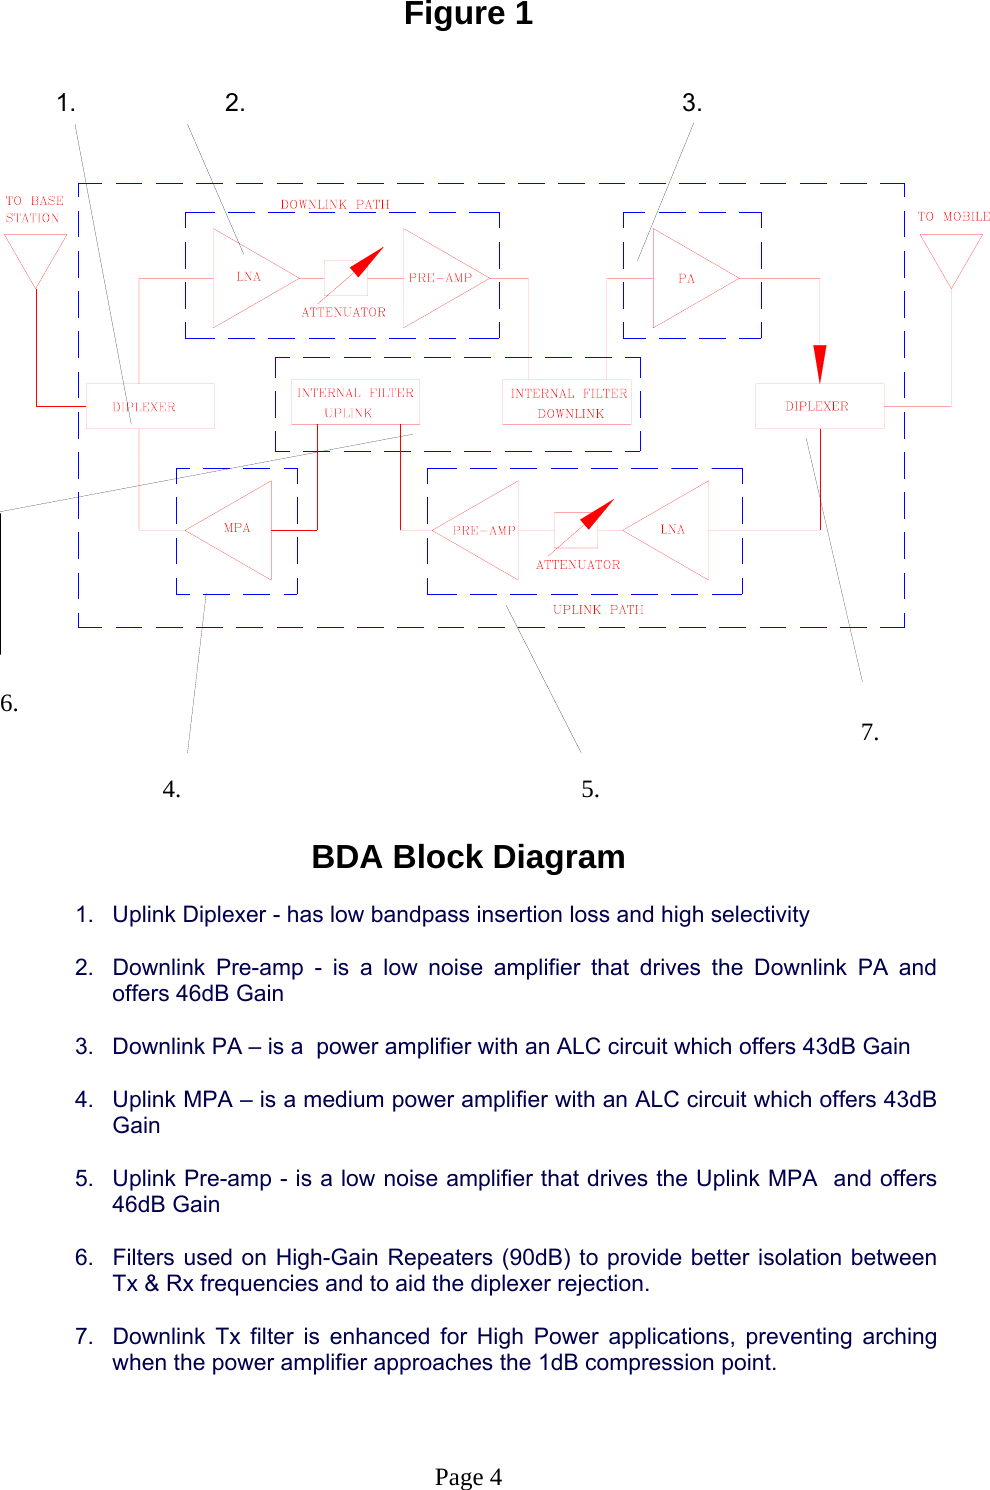 Figure 1            1.        2.             3.             6.                                                  7.                      4.                   5.  BDA Block Diagram  1.  Uplink Diplexer - has low bandpass insertion loss and high selectivity   2.  Downlink Pre-amp - is a low noise amplifier that drives the Downlink PA and offers 46dB Gain  3.  Downlink PA – is a  power amplifier with an ALC circuit which offers 43dB Gain  4.  Uplink MPA – is a medium power amplifier with an ALC circuit which offers 43dB Gain  5.  Uplink Pre-amp - is a low noise amplifier that drives the Uplink MPA  and offers 46dB Gain  6.  Filters used on High-Gain Repeaters (90dB) to provide better isolation between Tx &amp; Rx frequencies and to aid the diplexer rejection.  7.  Downlink Tx filter is enhanced for High Power applications, preventing arching when the power amplifier approaches the 1dB compression point.    Page 4 